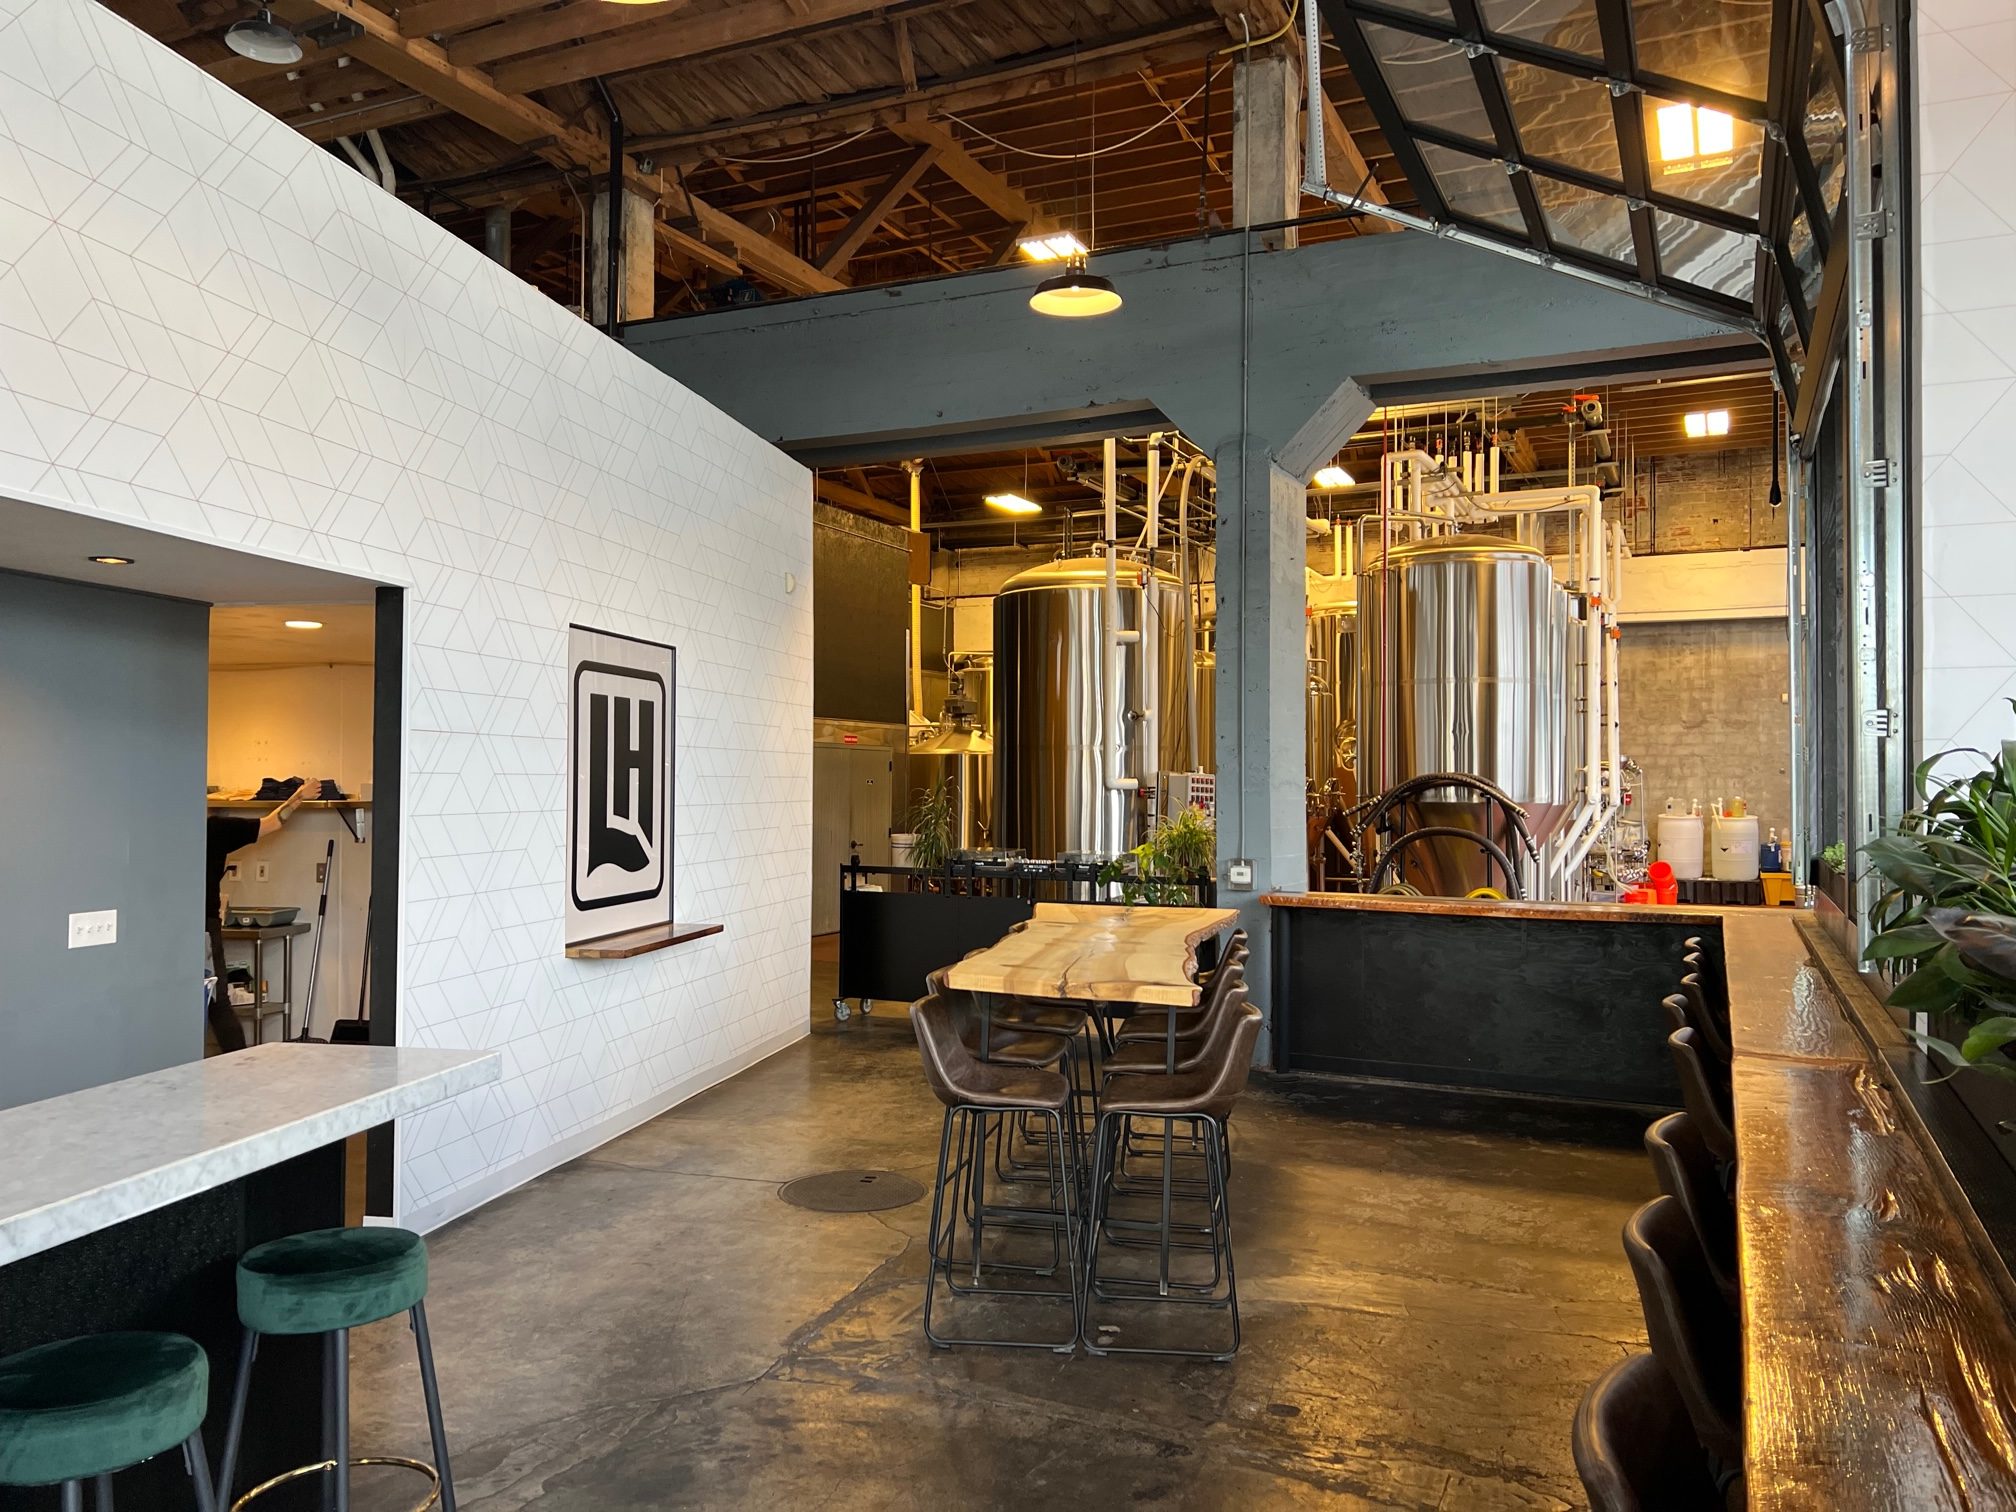 Views of the brewhouse can be had from that taproom at Living Haüs Beer Co.